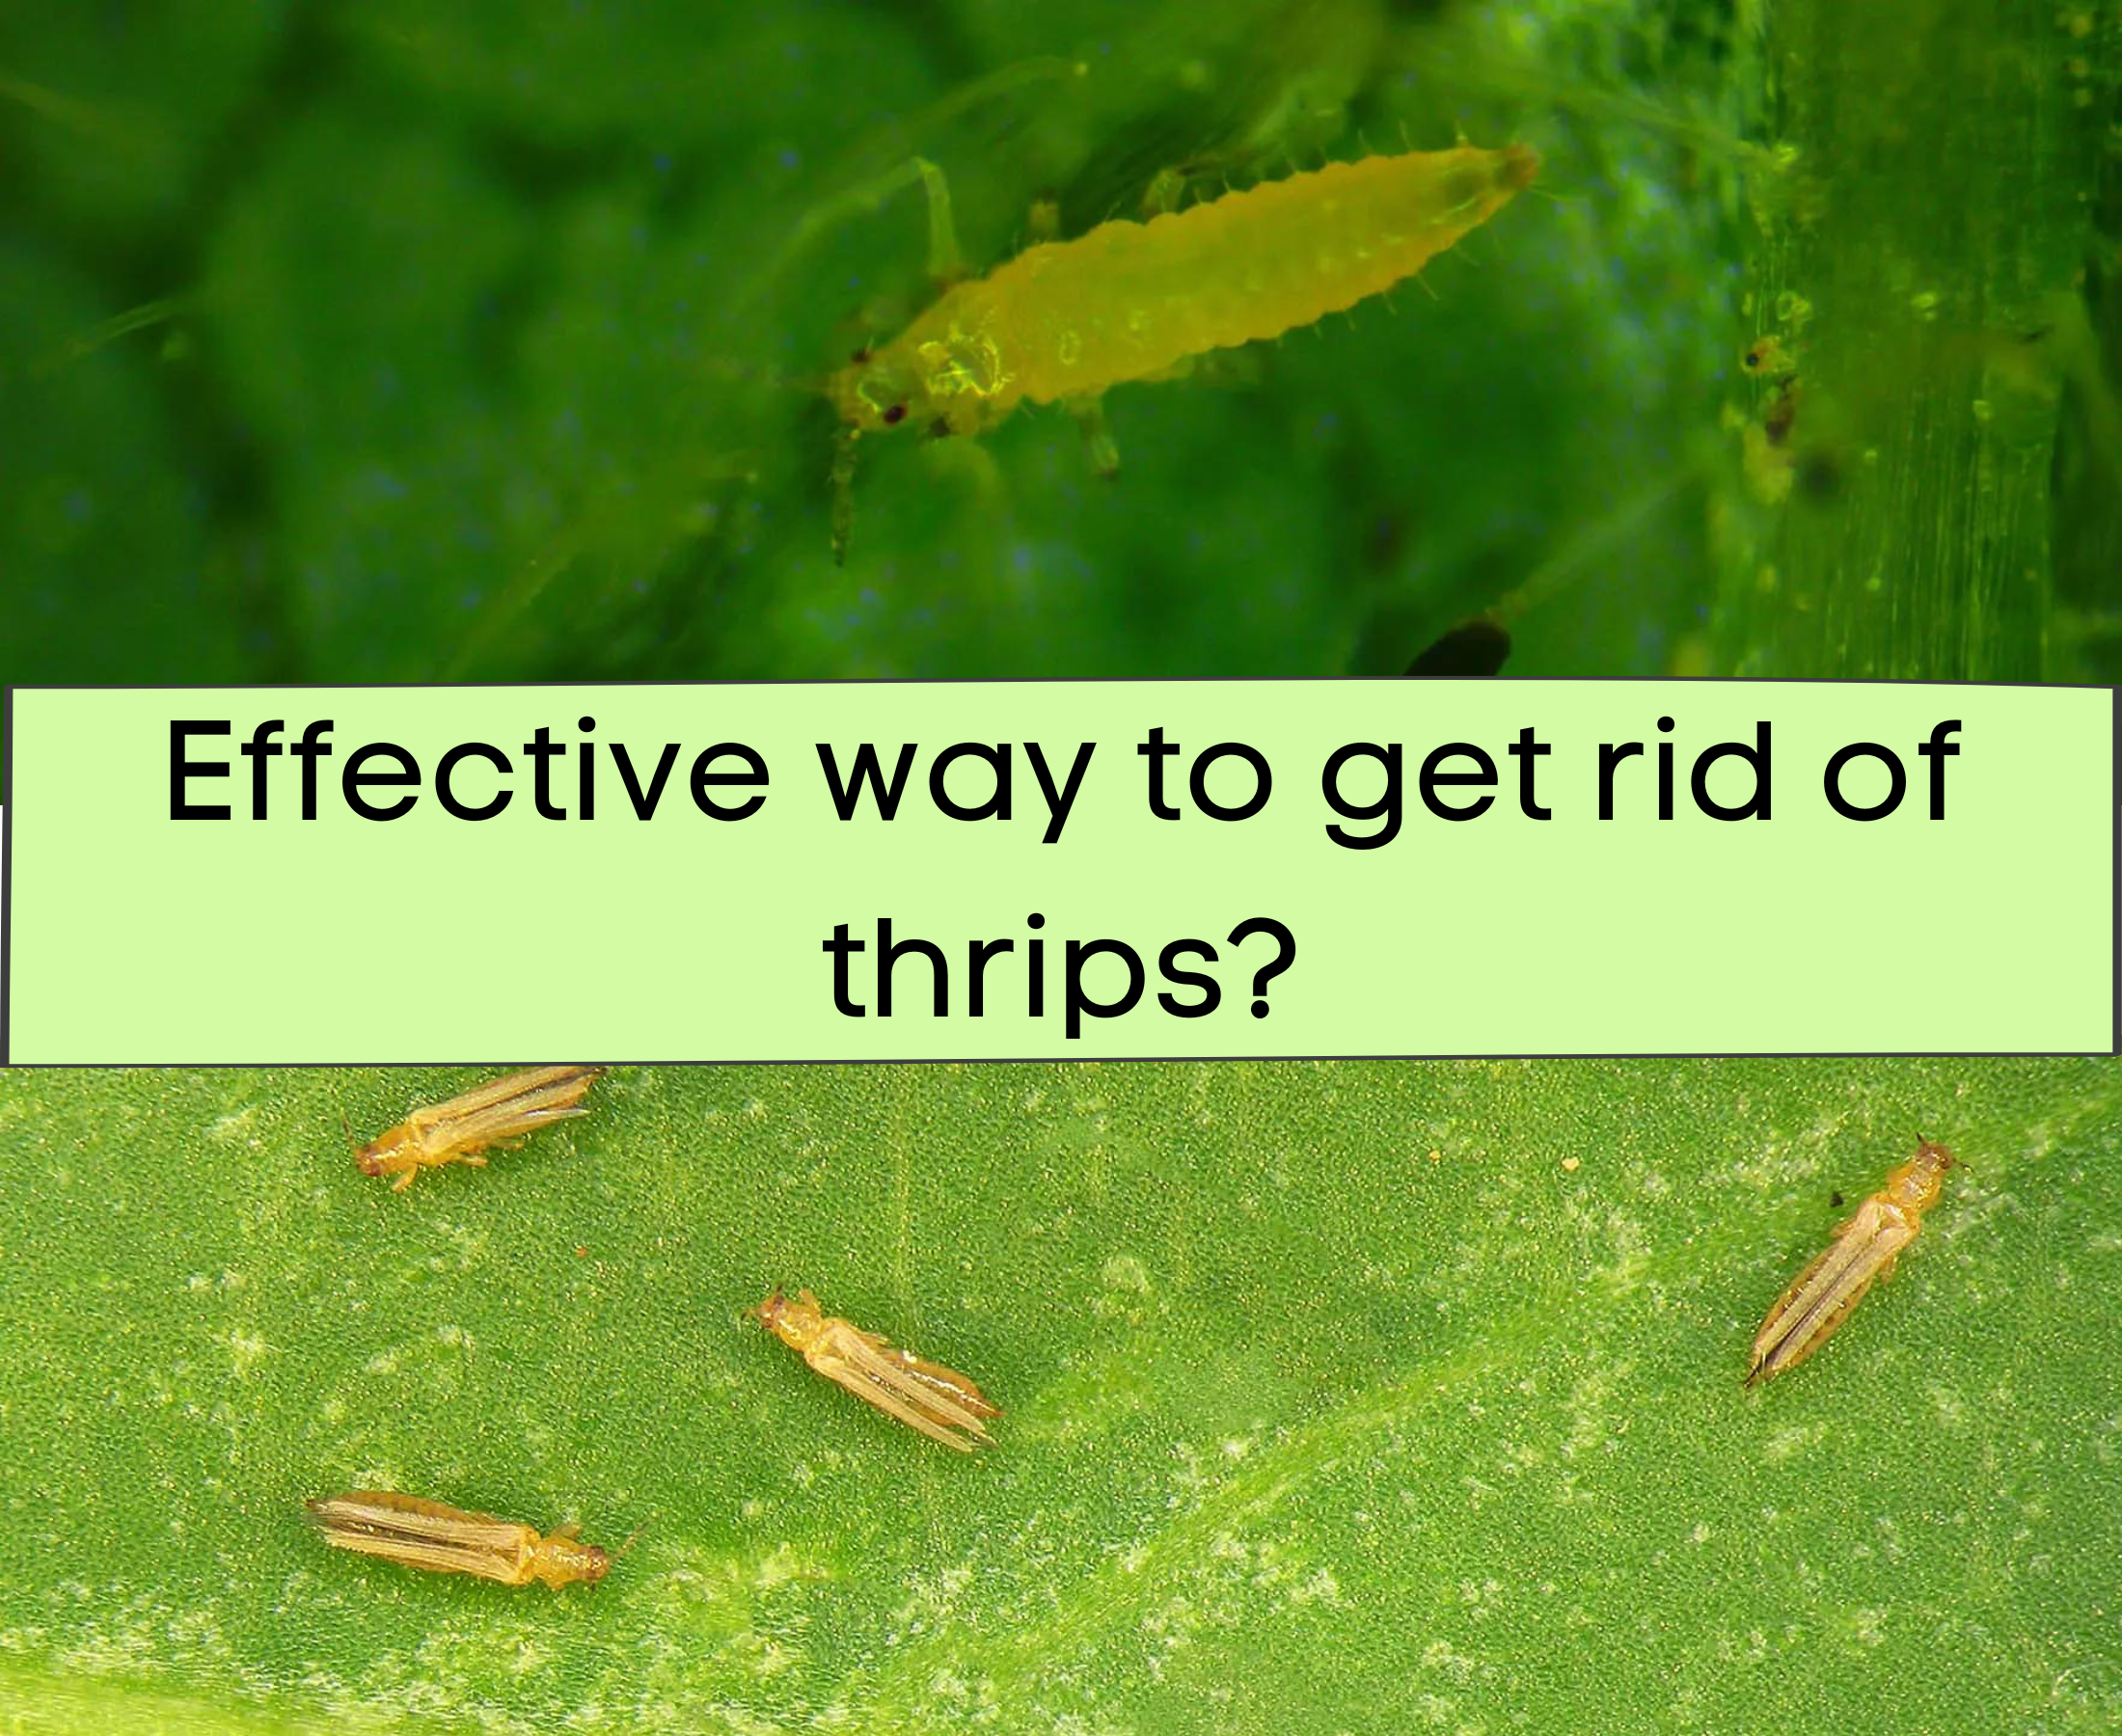 How can thrips be controlled naturally?